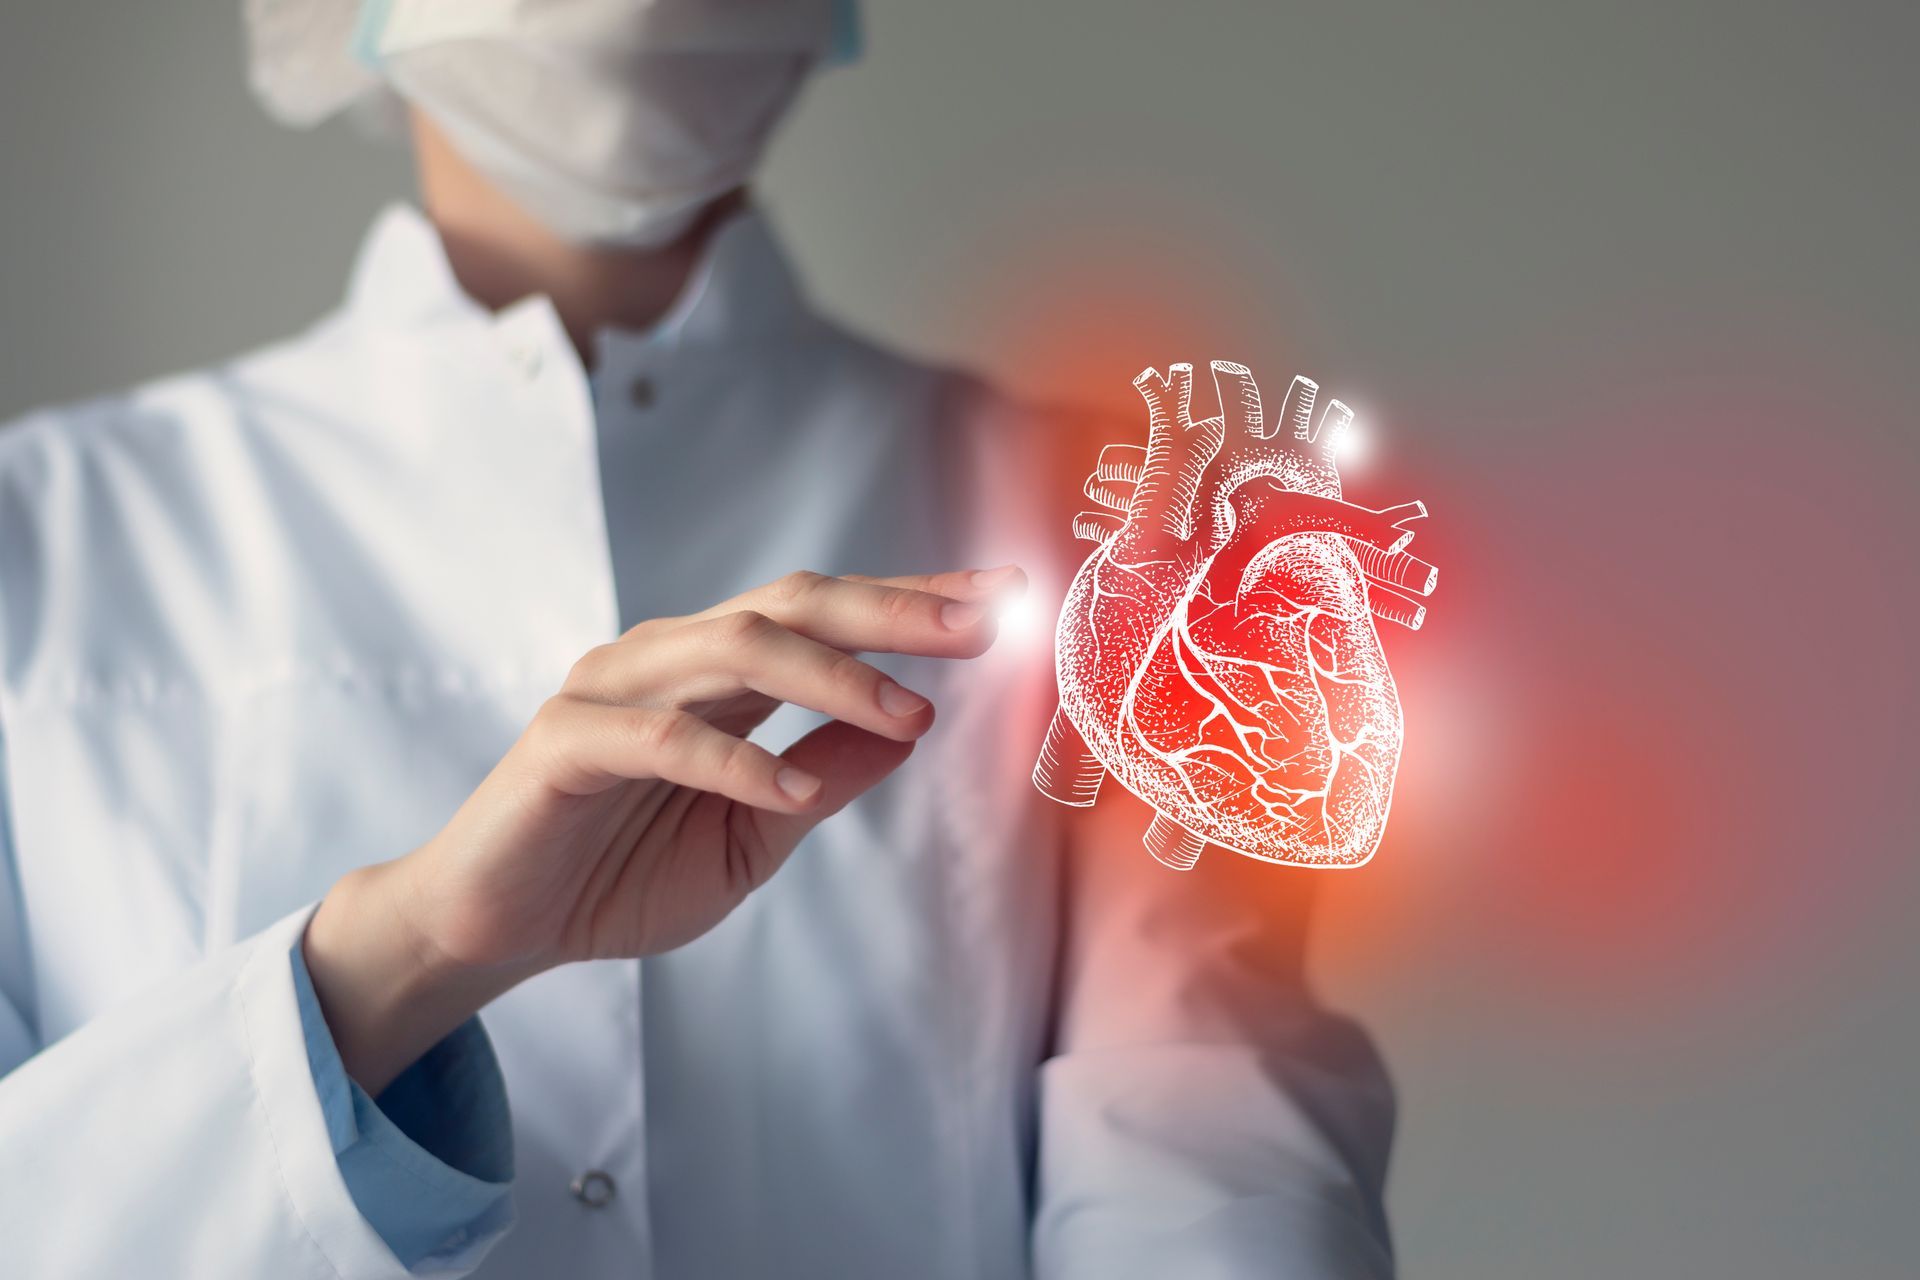 A graphic of a human heart and a doctor in a white lab coat.